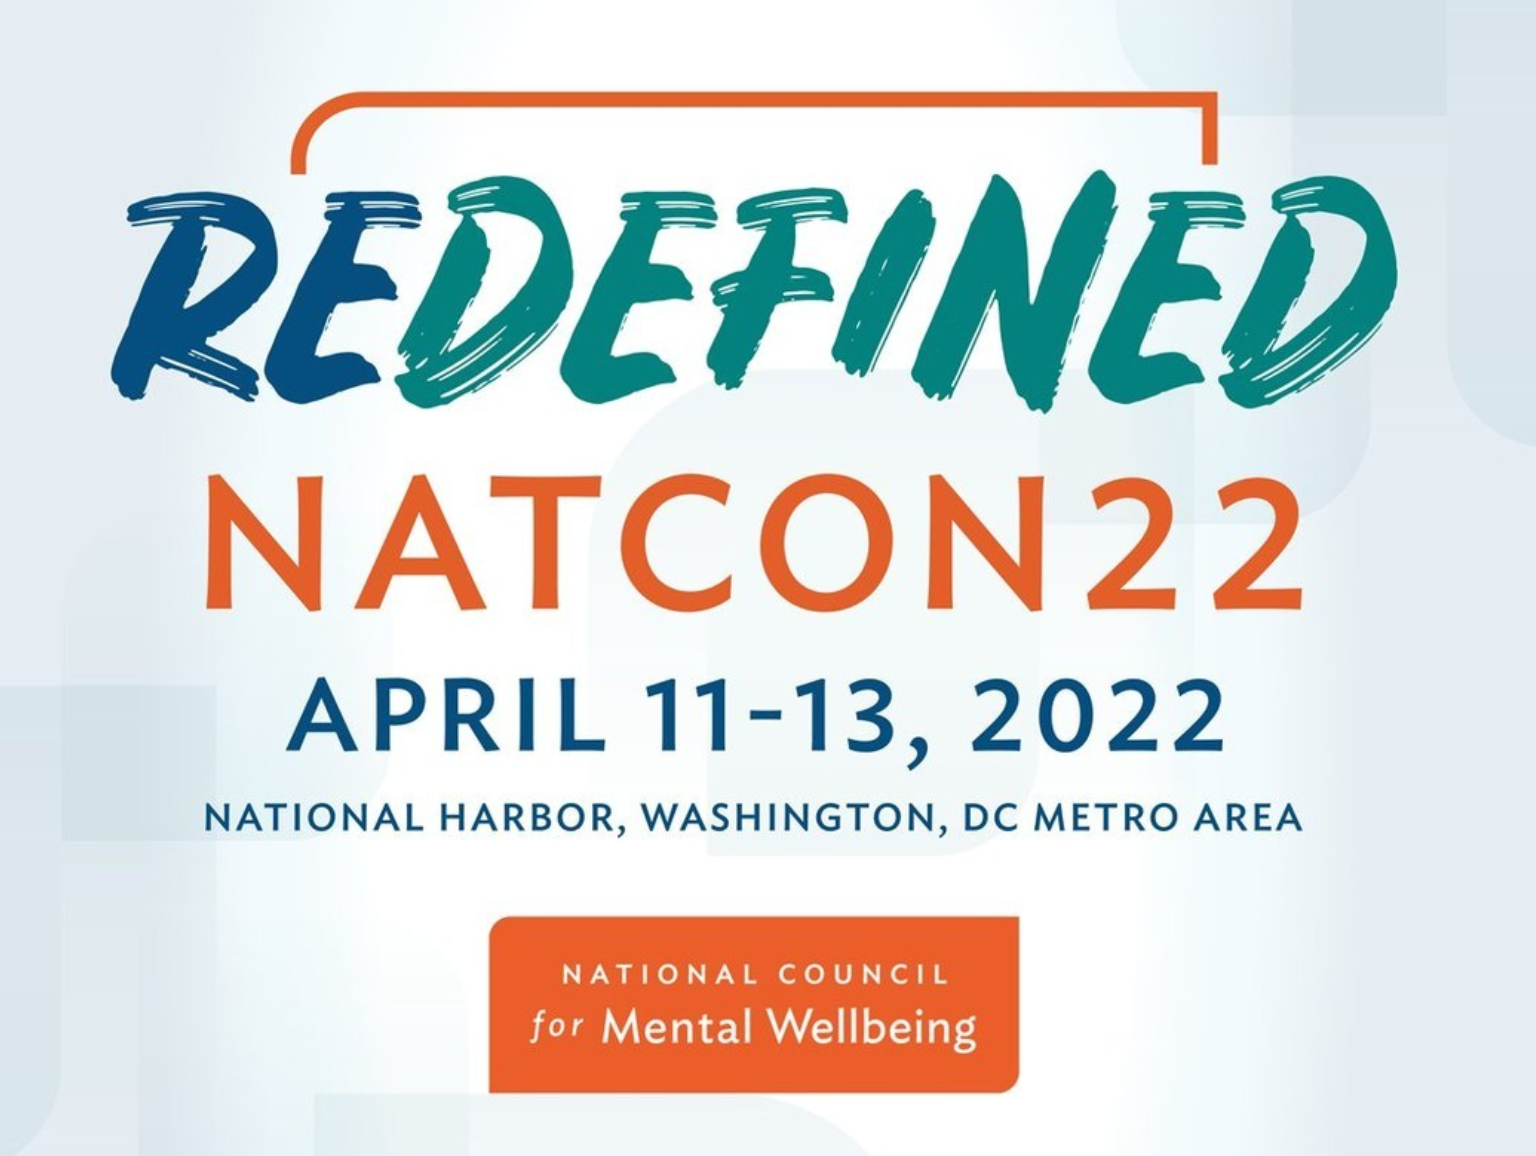 The Institute Presents at Redefined: National Council 2022